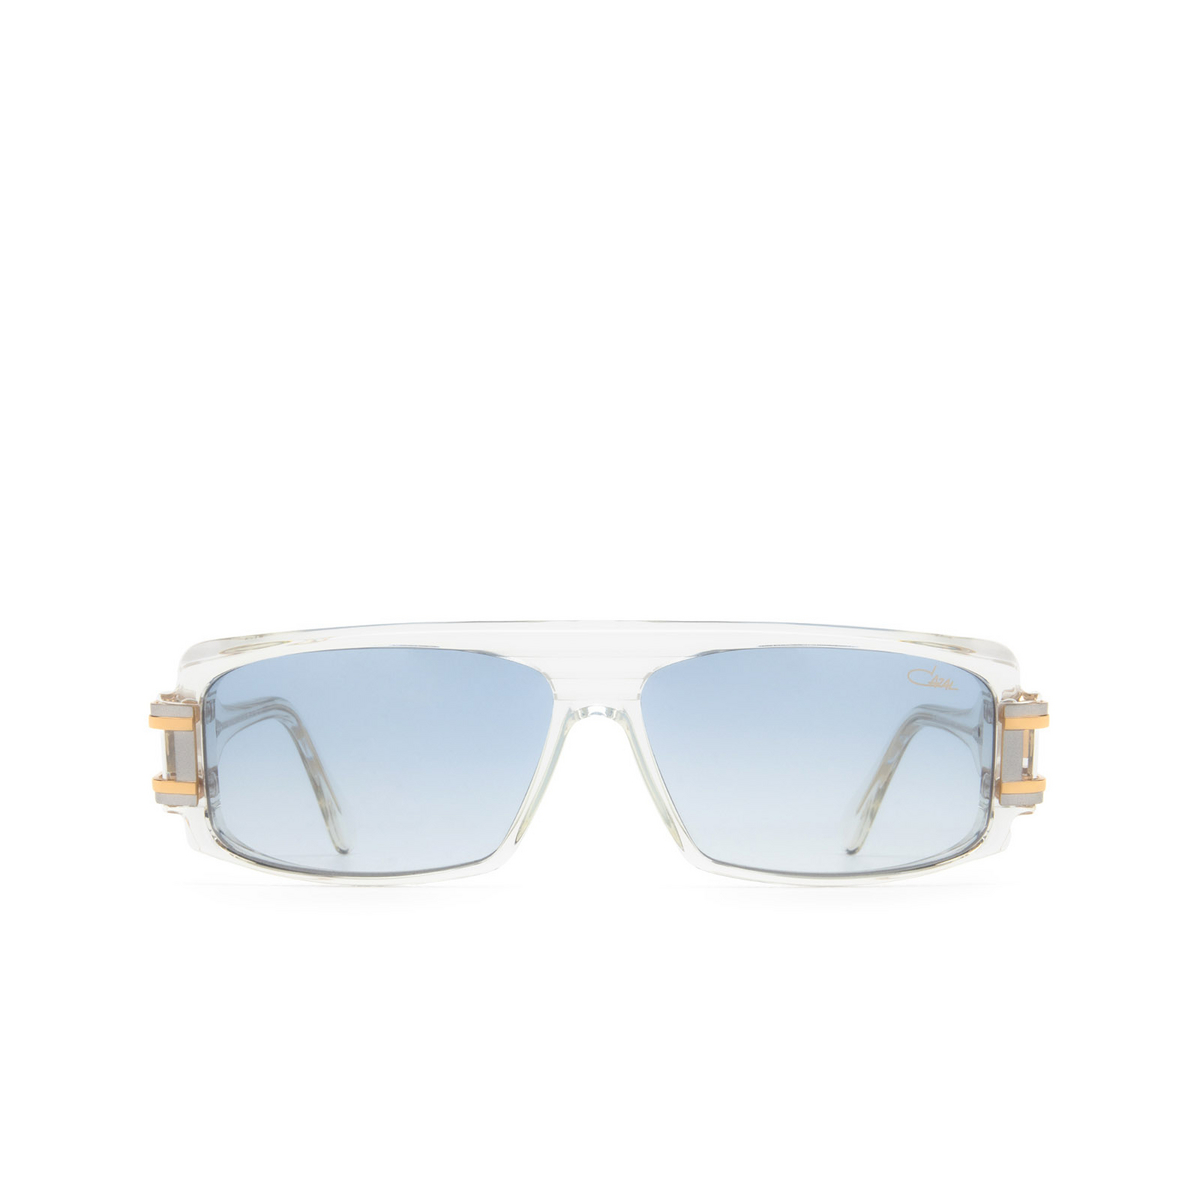 Cazal 164/3 Sunglasses 002 Crystal - Bicolour - front view